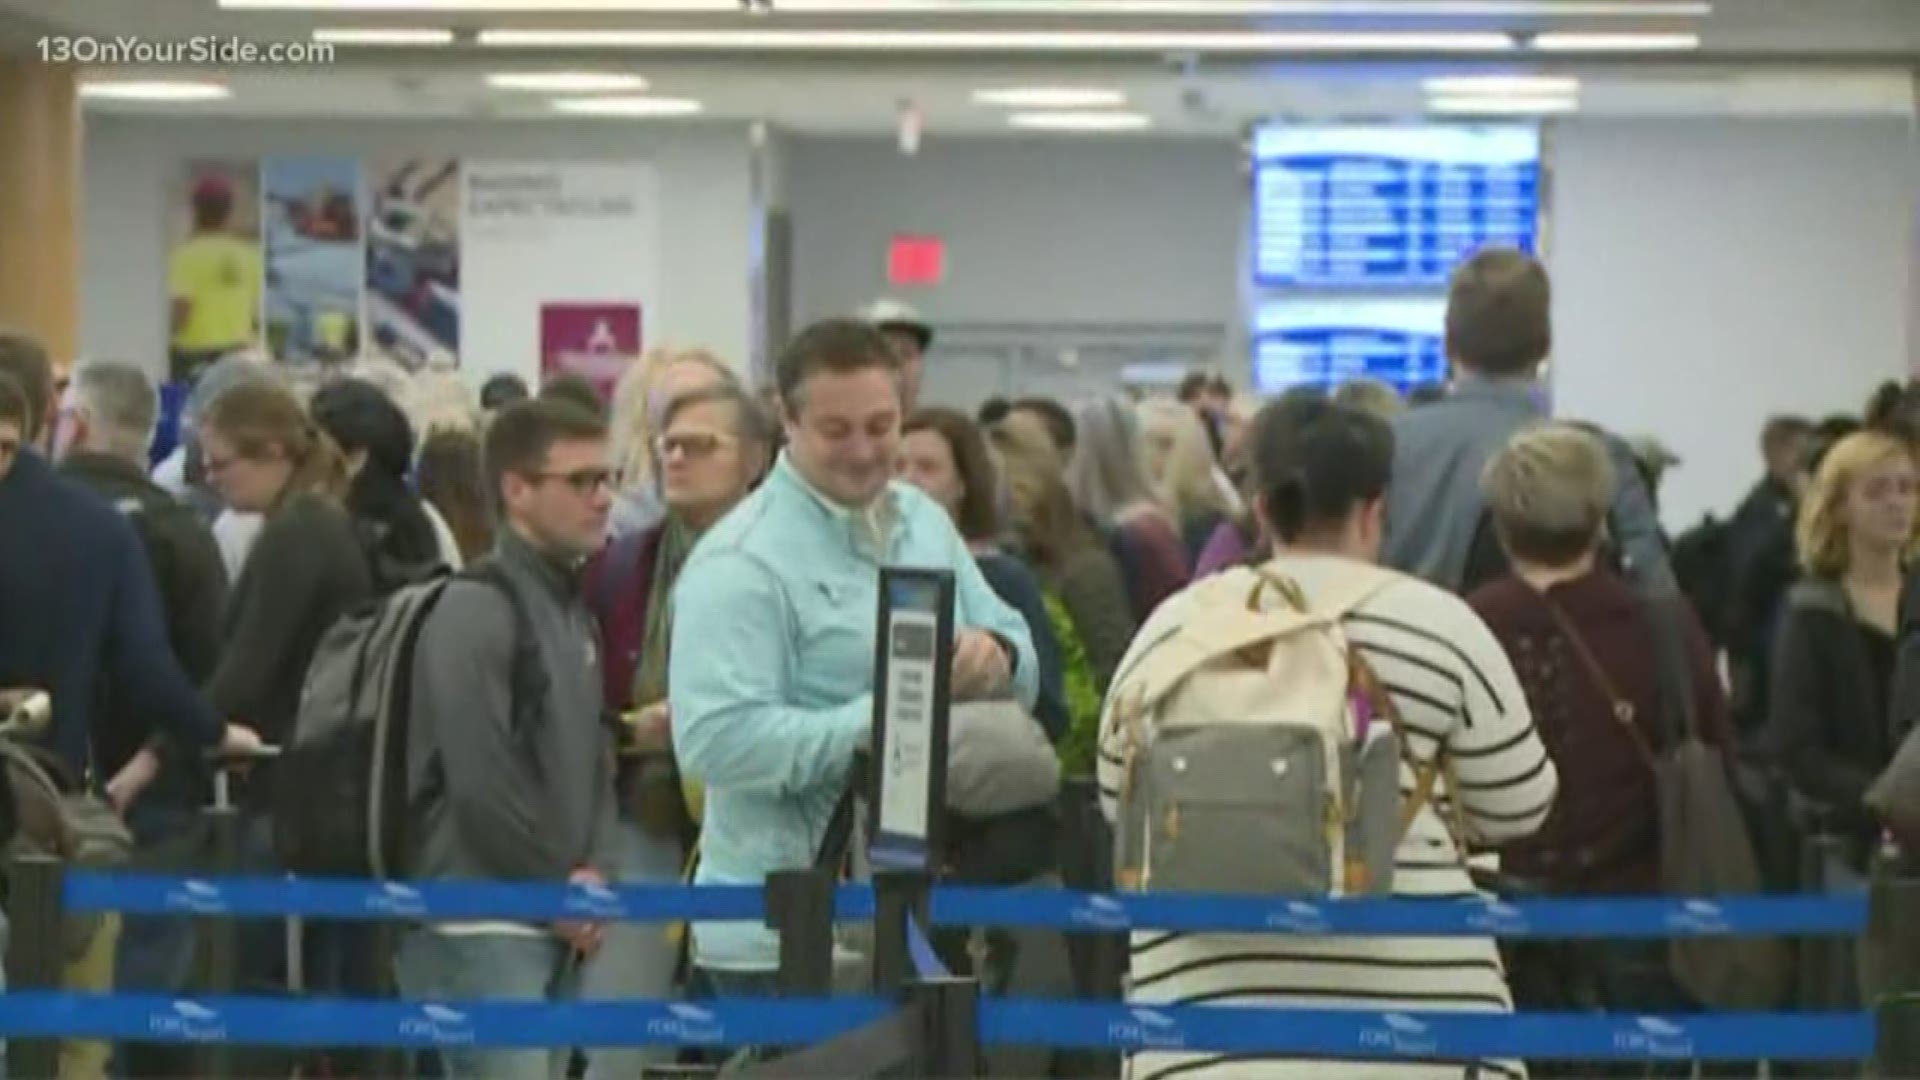 If you're flying out of the Ford Airport for Thanksgiving, here's everything you may want to know before heading out.